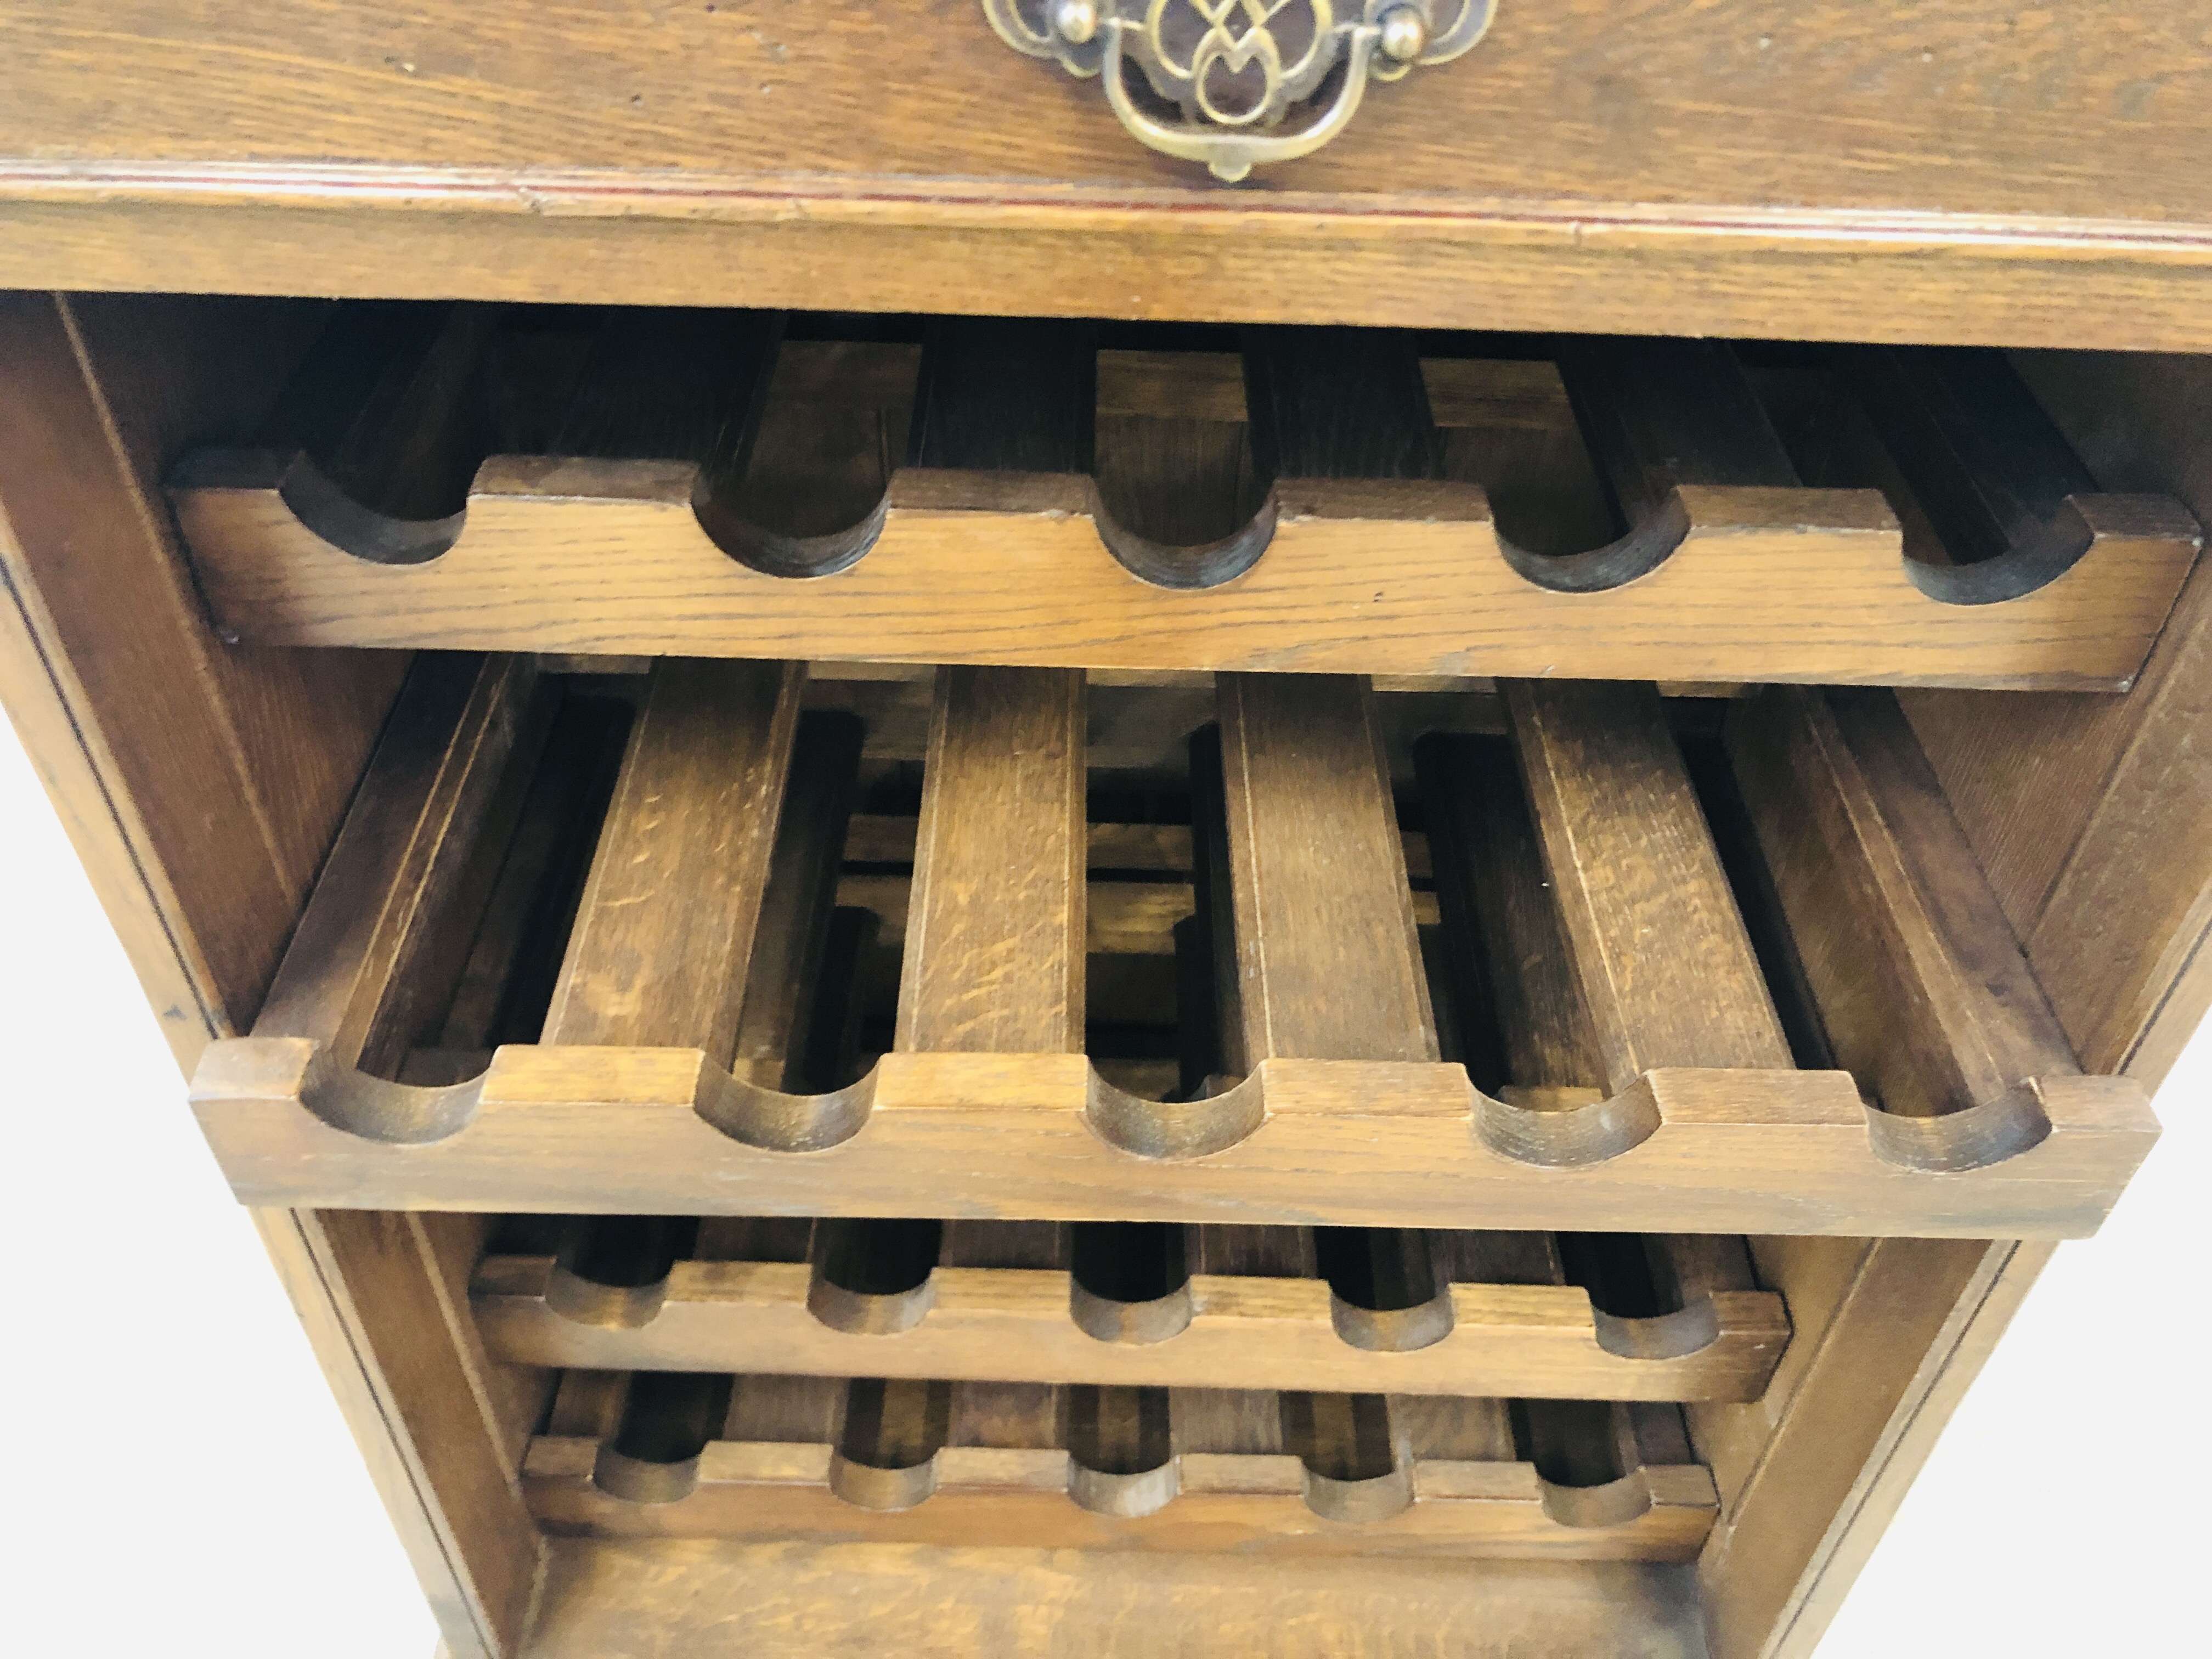 A GOOD QUALITY SOLID OAK WINE CELLAR, - Image 3 of 9